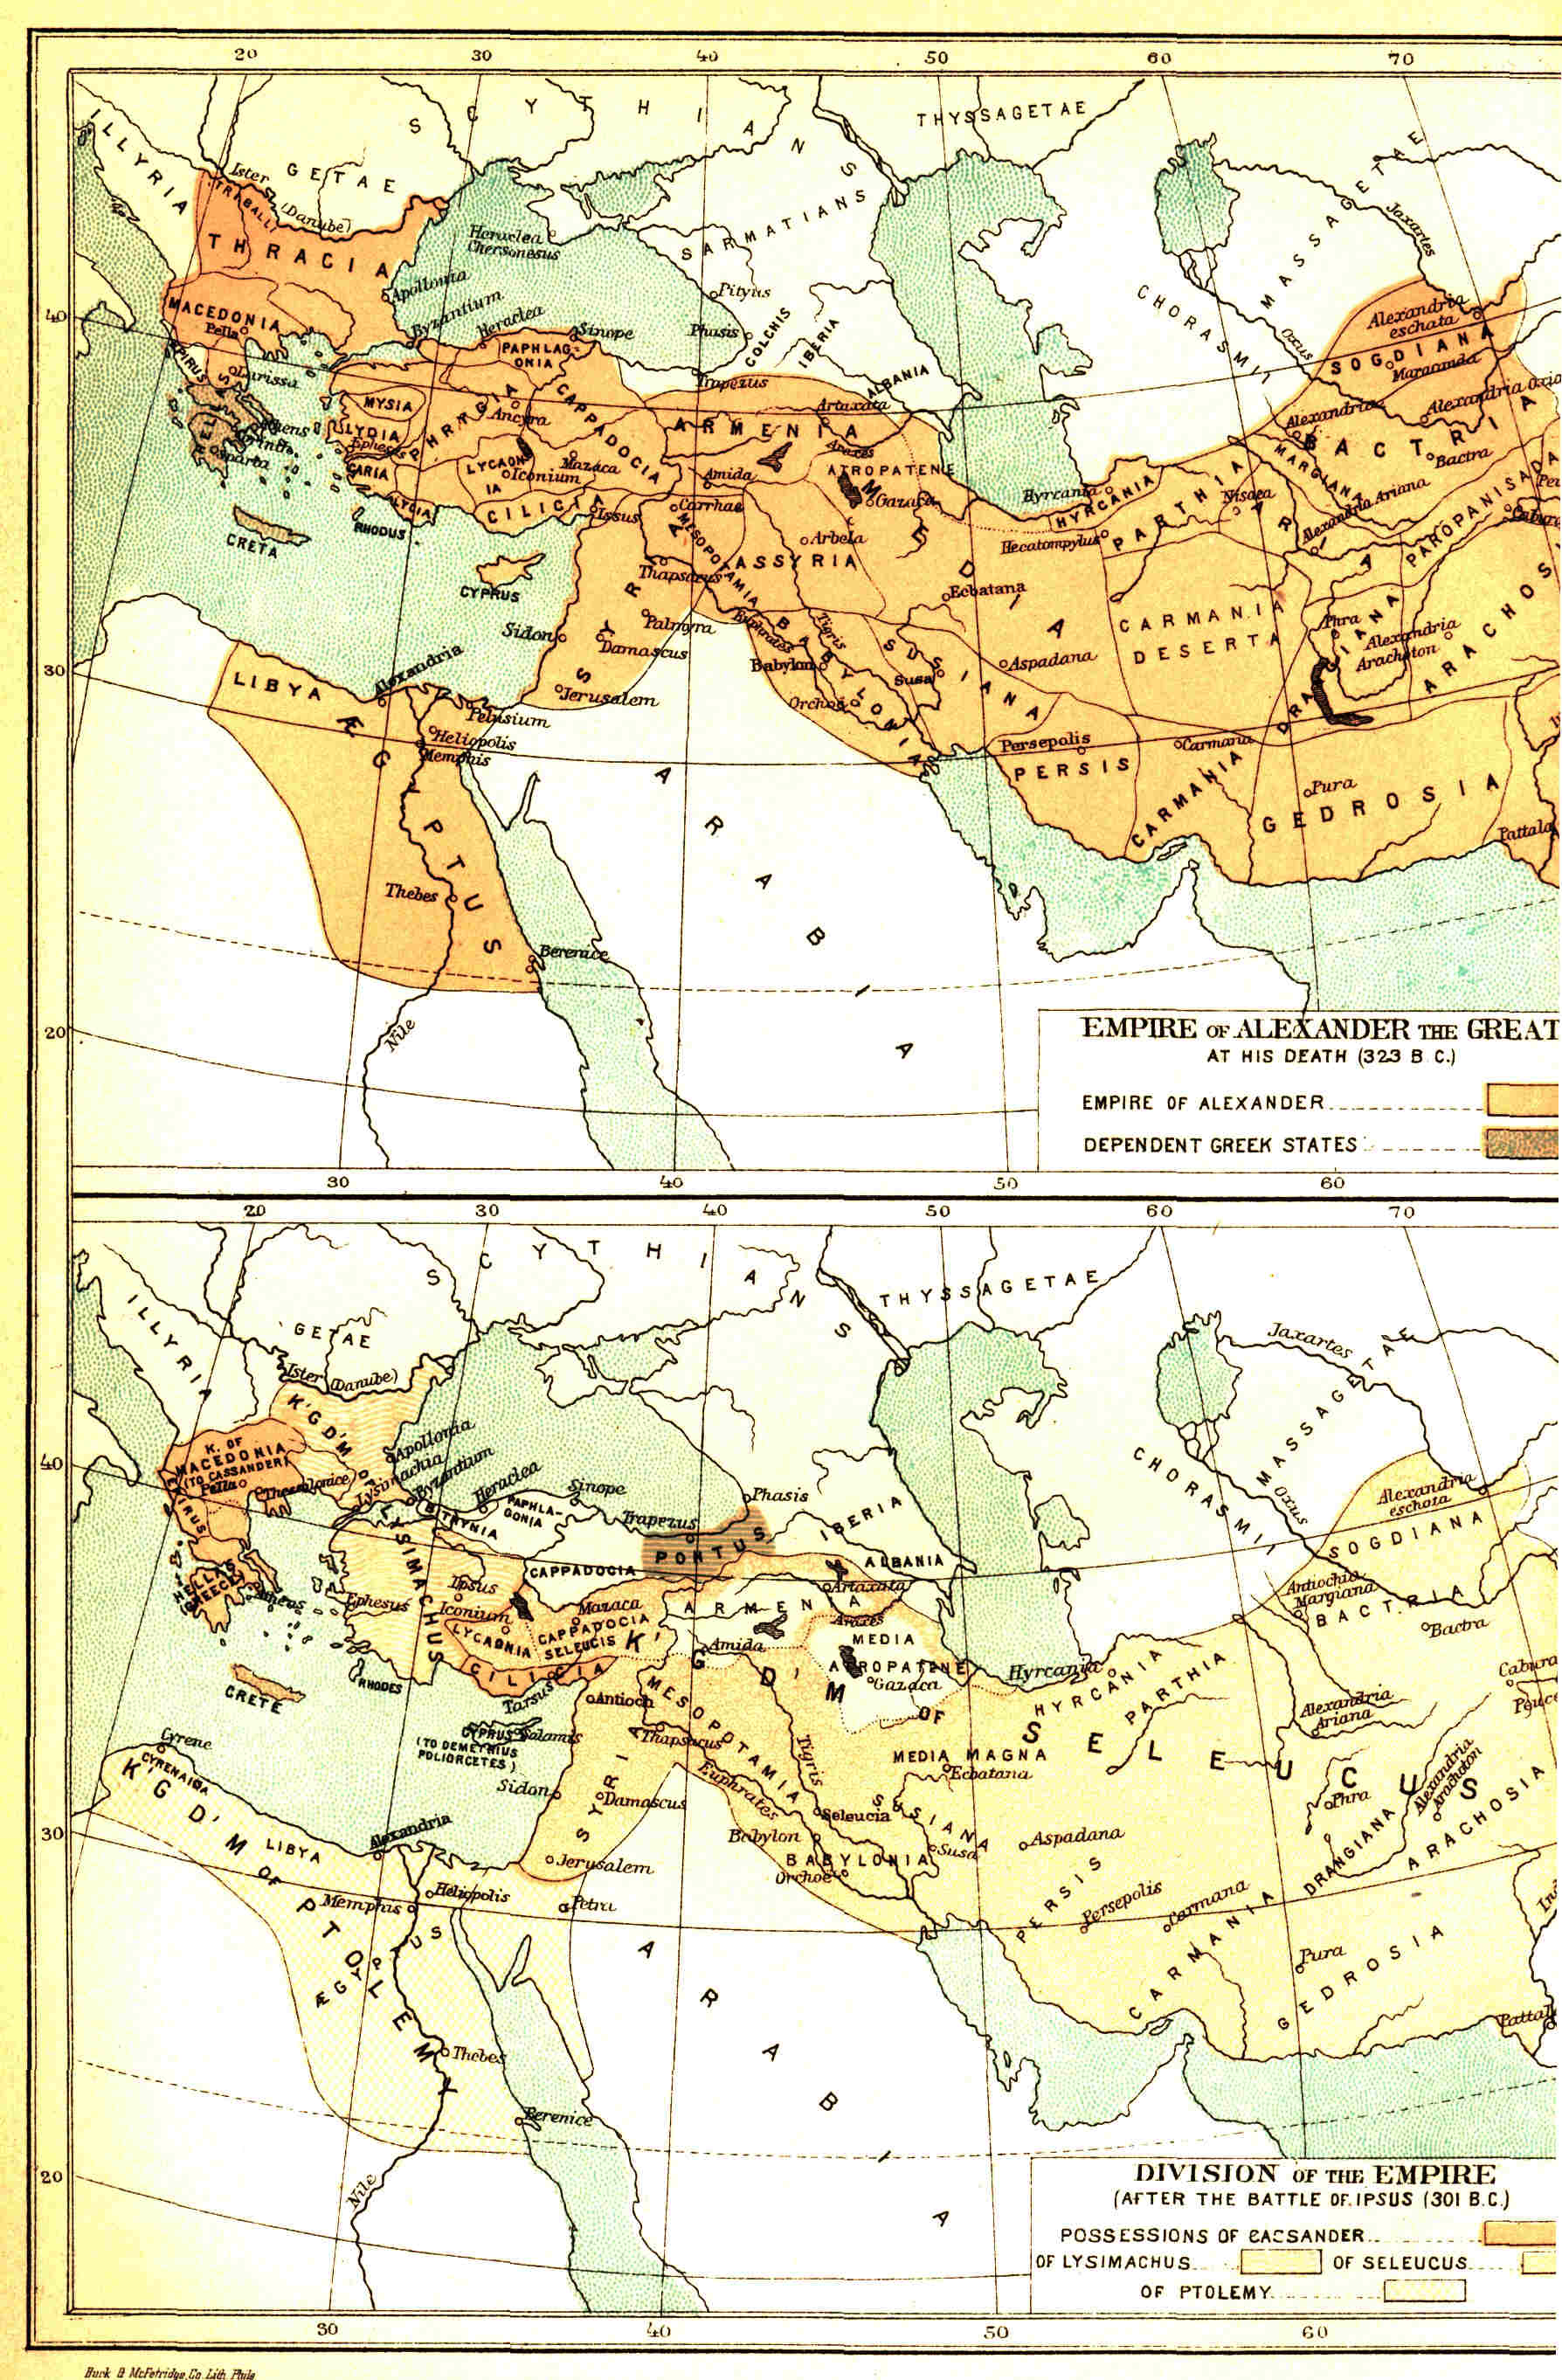 Four maps of the Empire of Alexander the Great and
his successors.